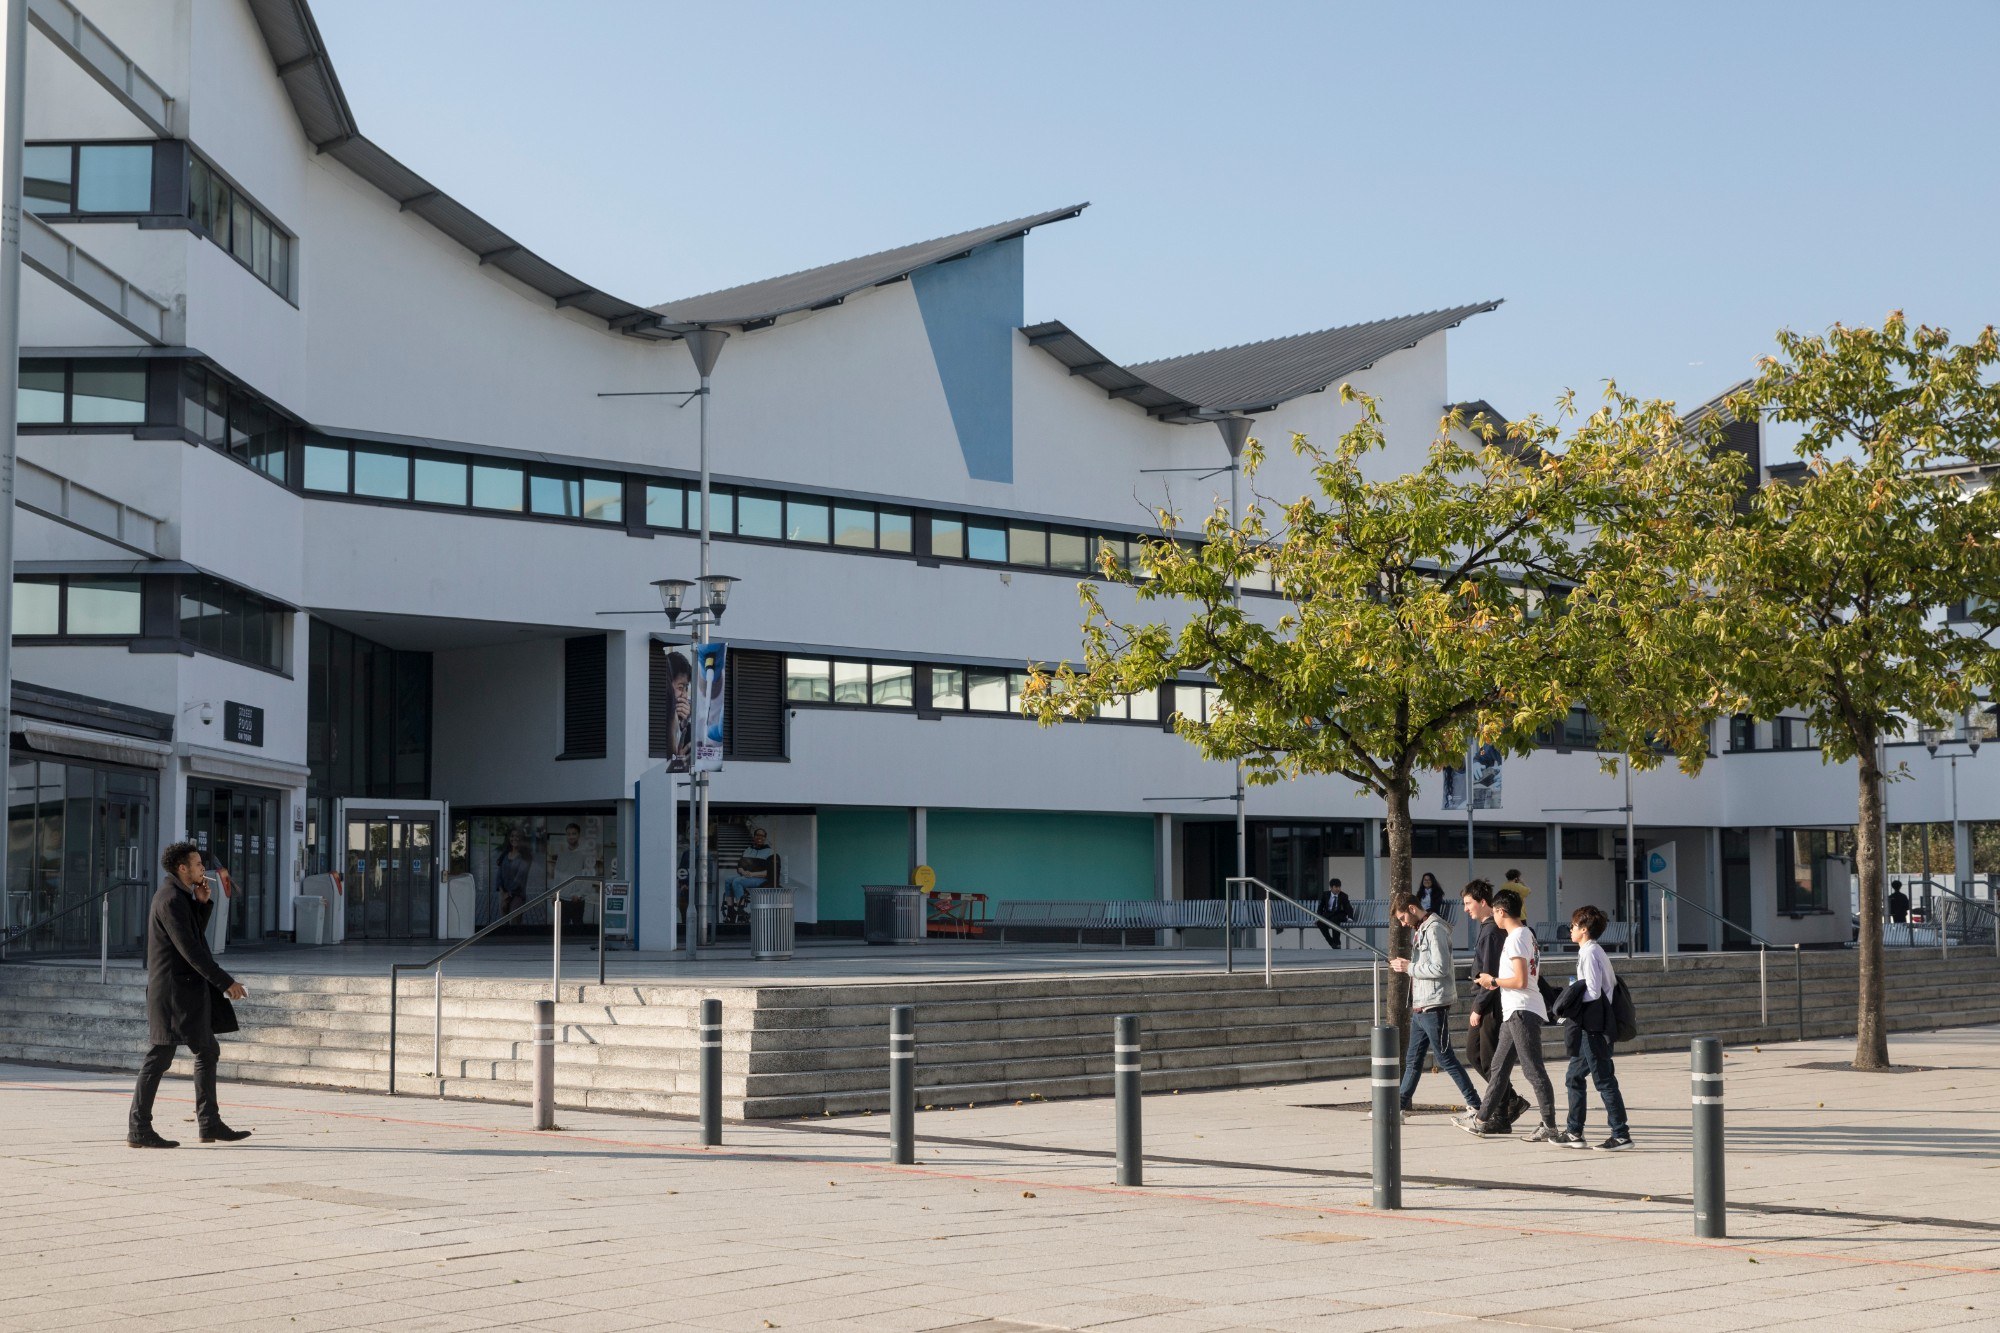 The University of East London campus